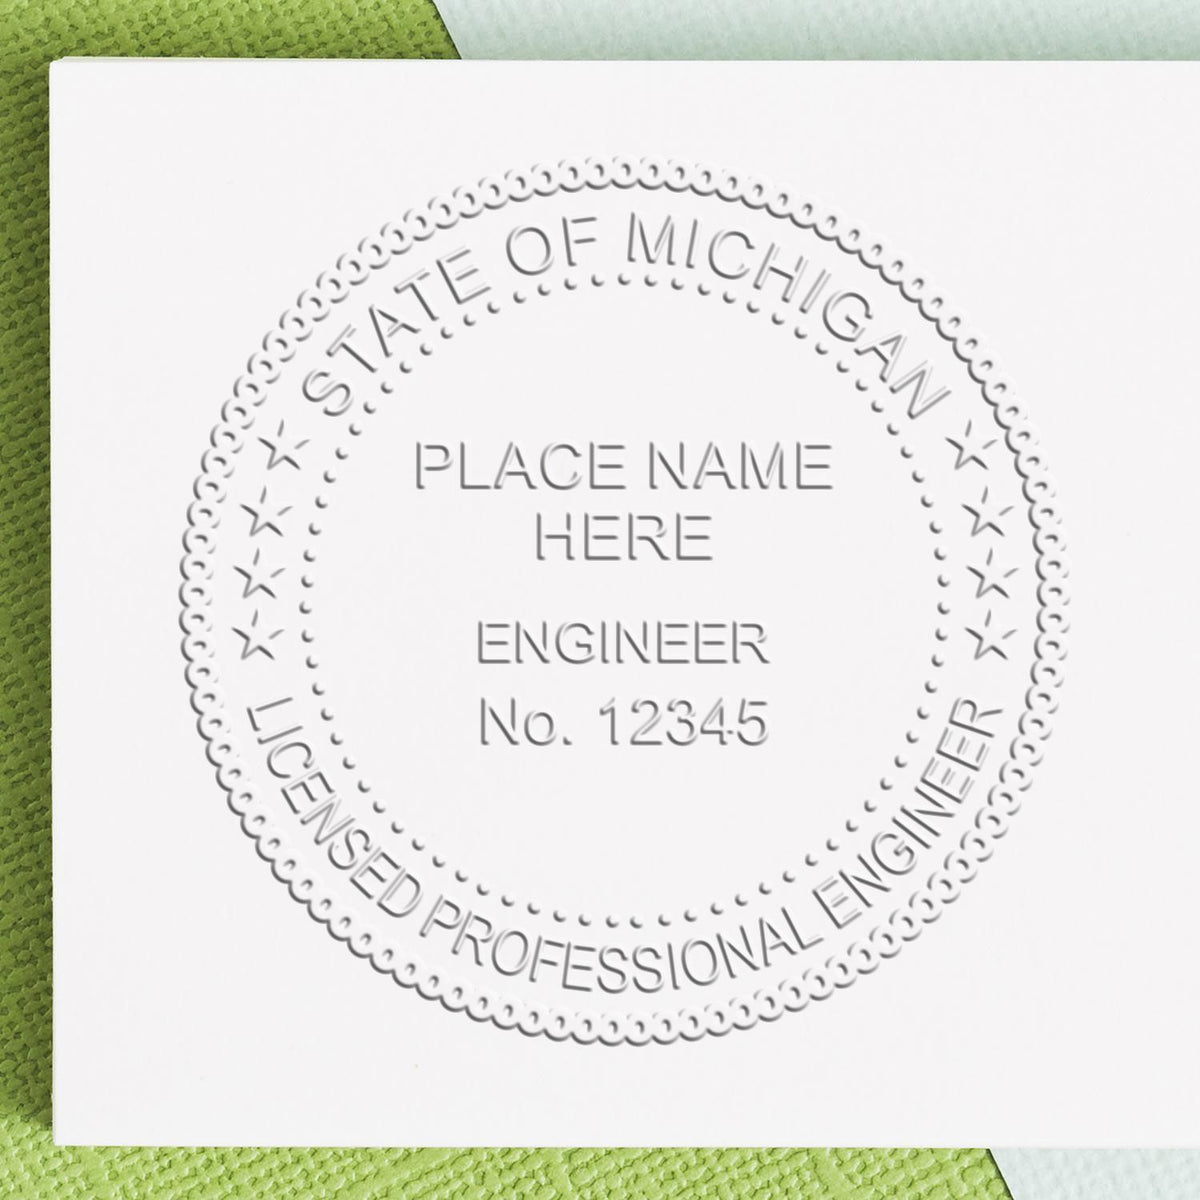 A photograph of the Hybrid Michigan Engineer Seal stamp impression reveals a vivid, professional image of the on paper.